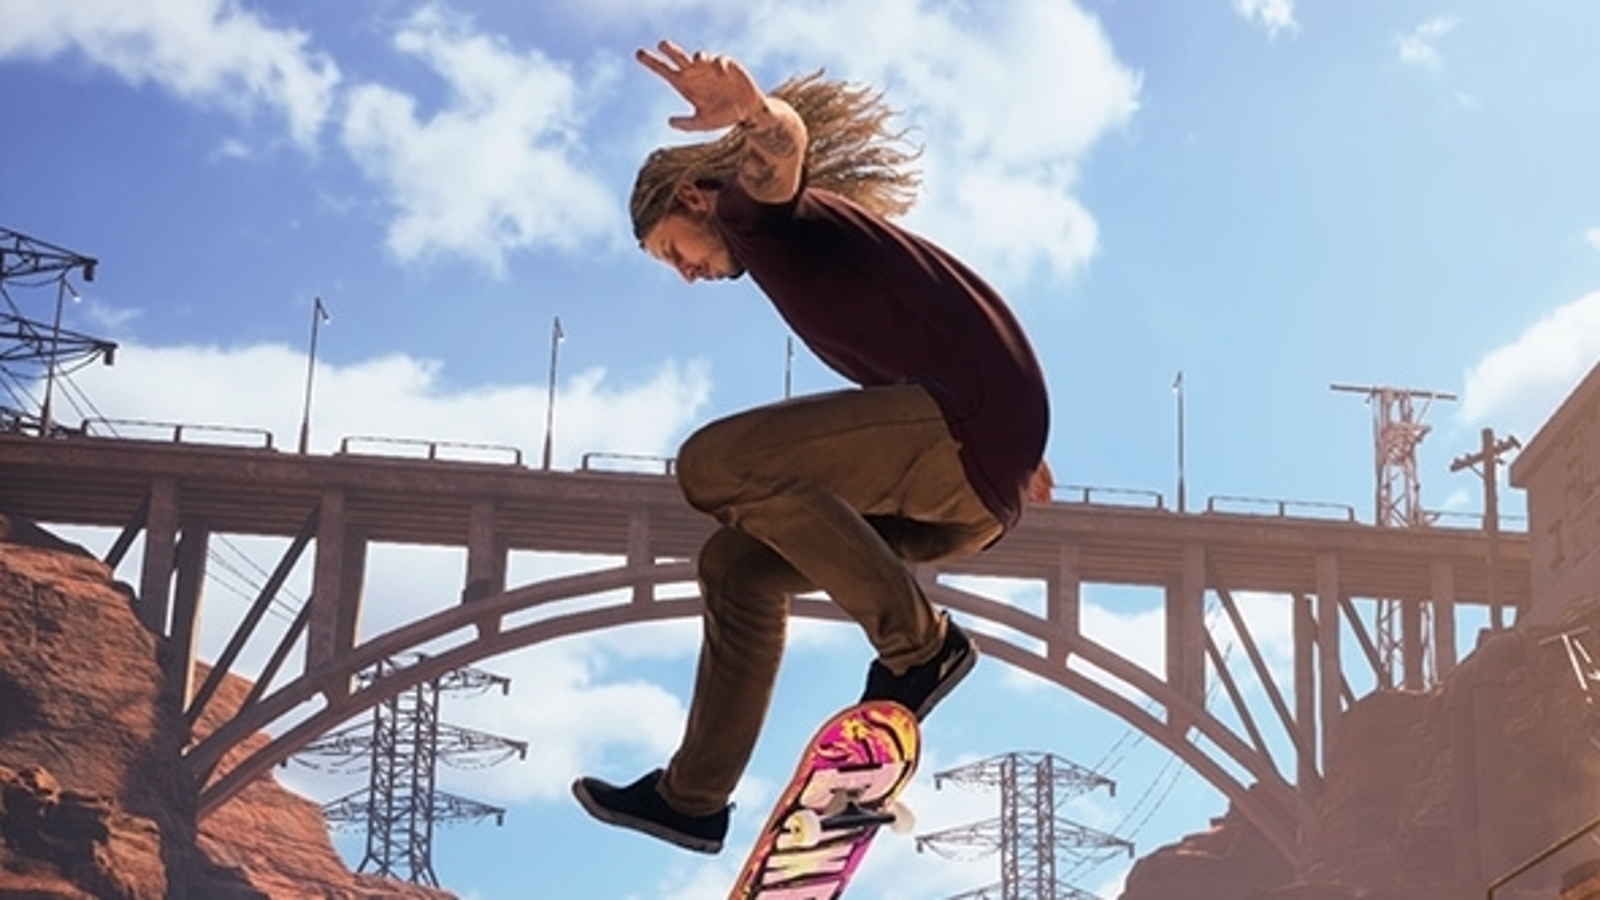 Tony Hawk Says Activision Killed Plans For More THPS Games - Game Informer